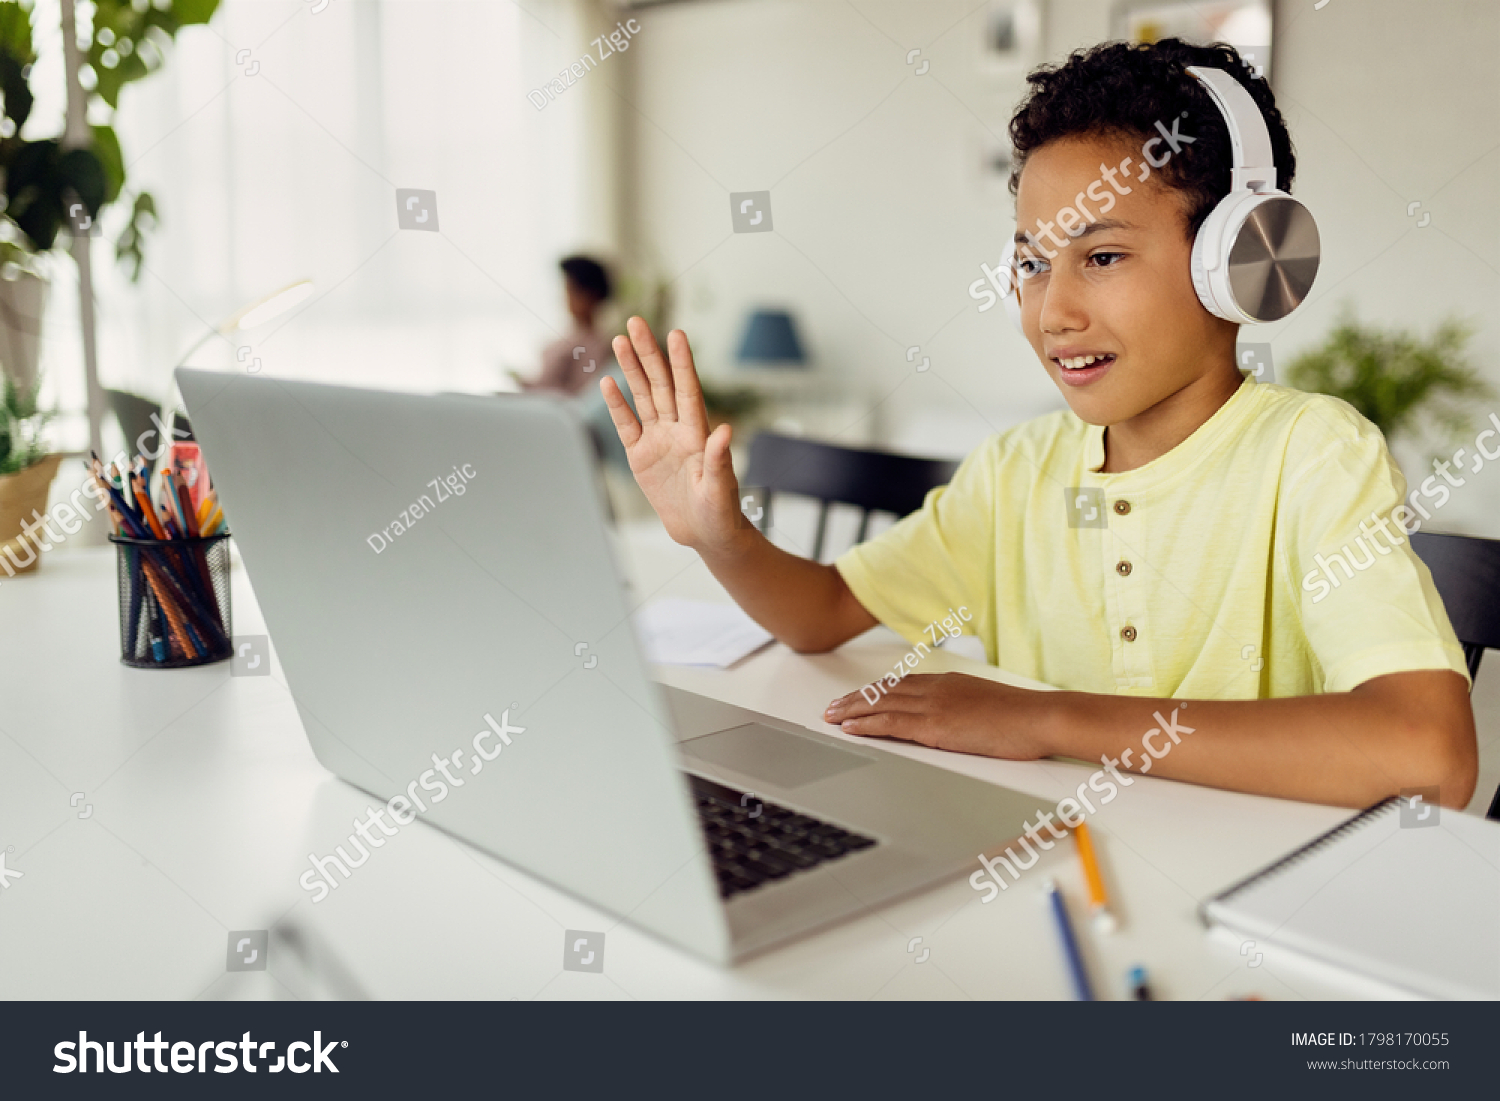 Smiling black boy making video call over laptop and waving while e-learning at home.  #1798170055